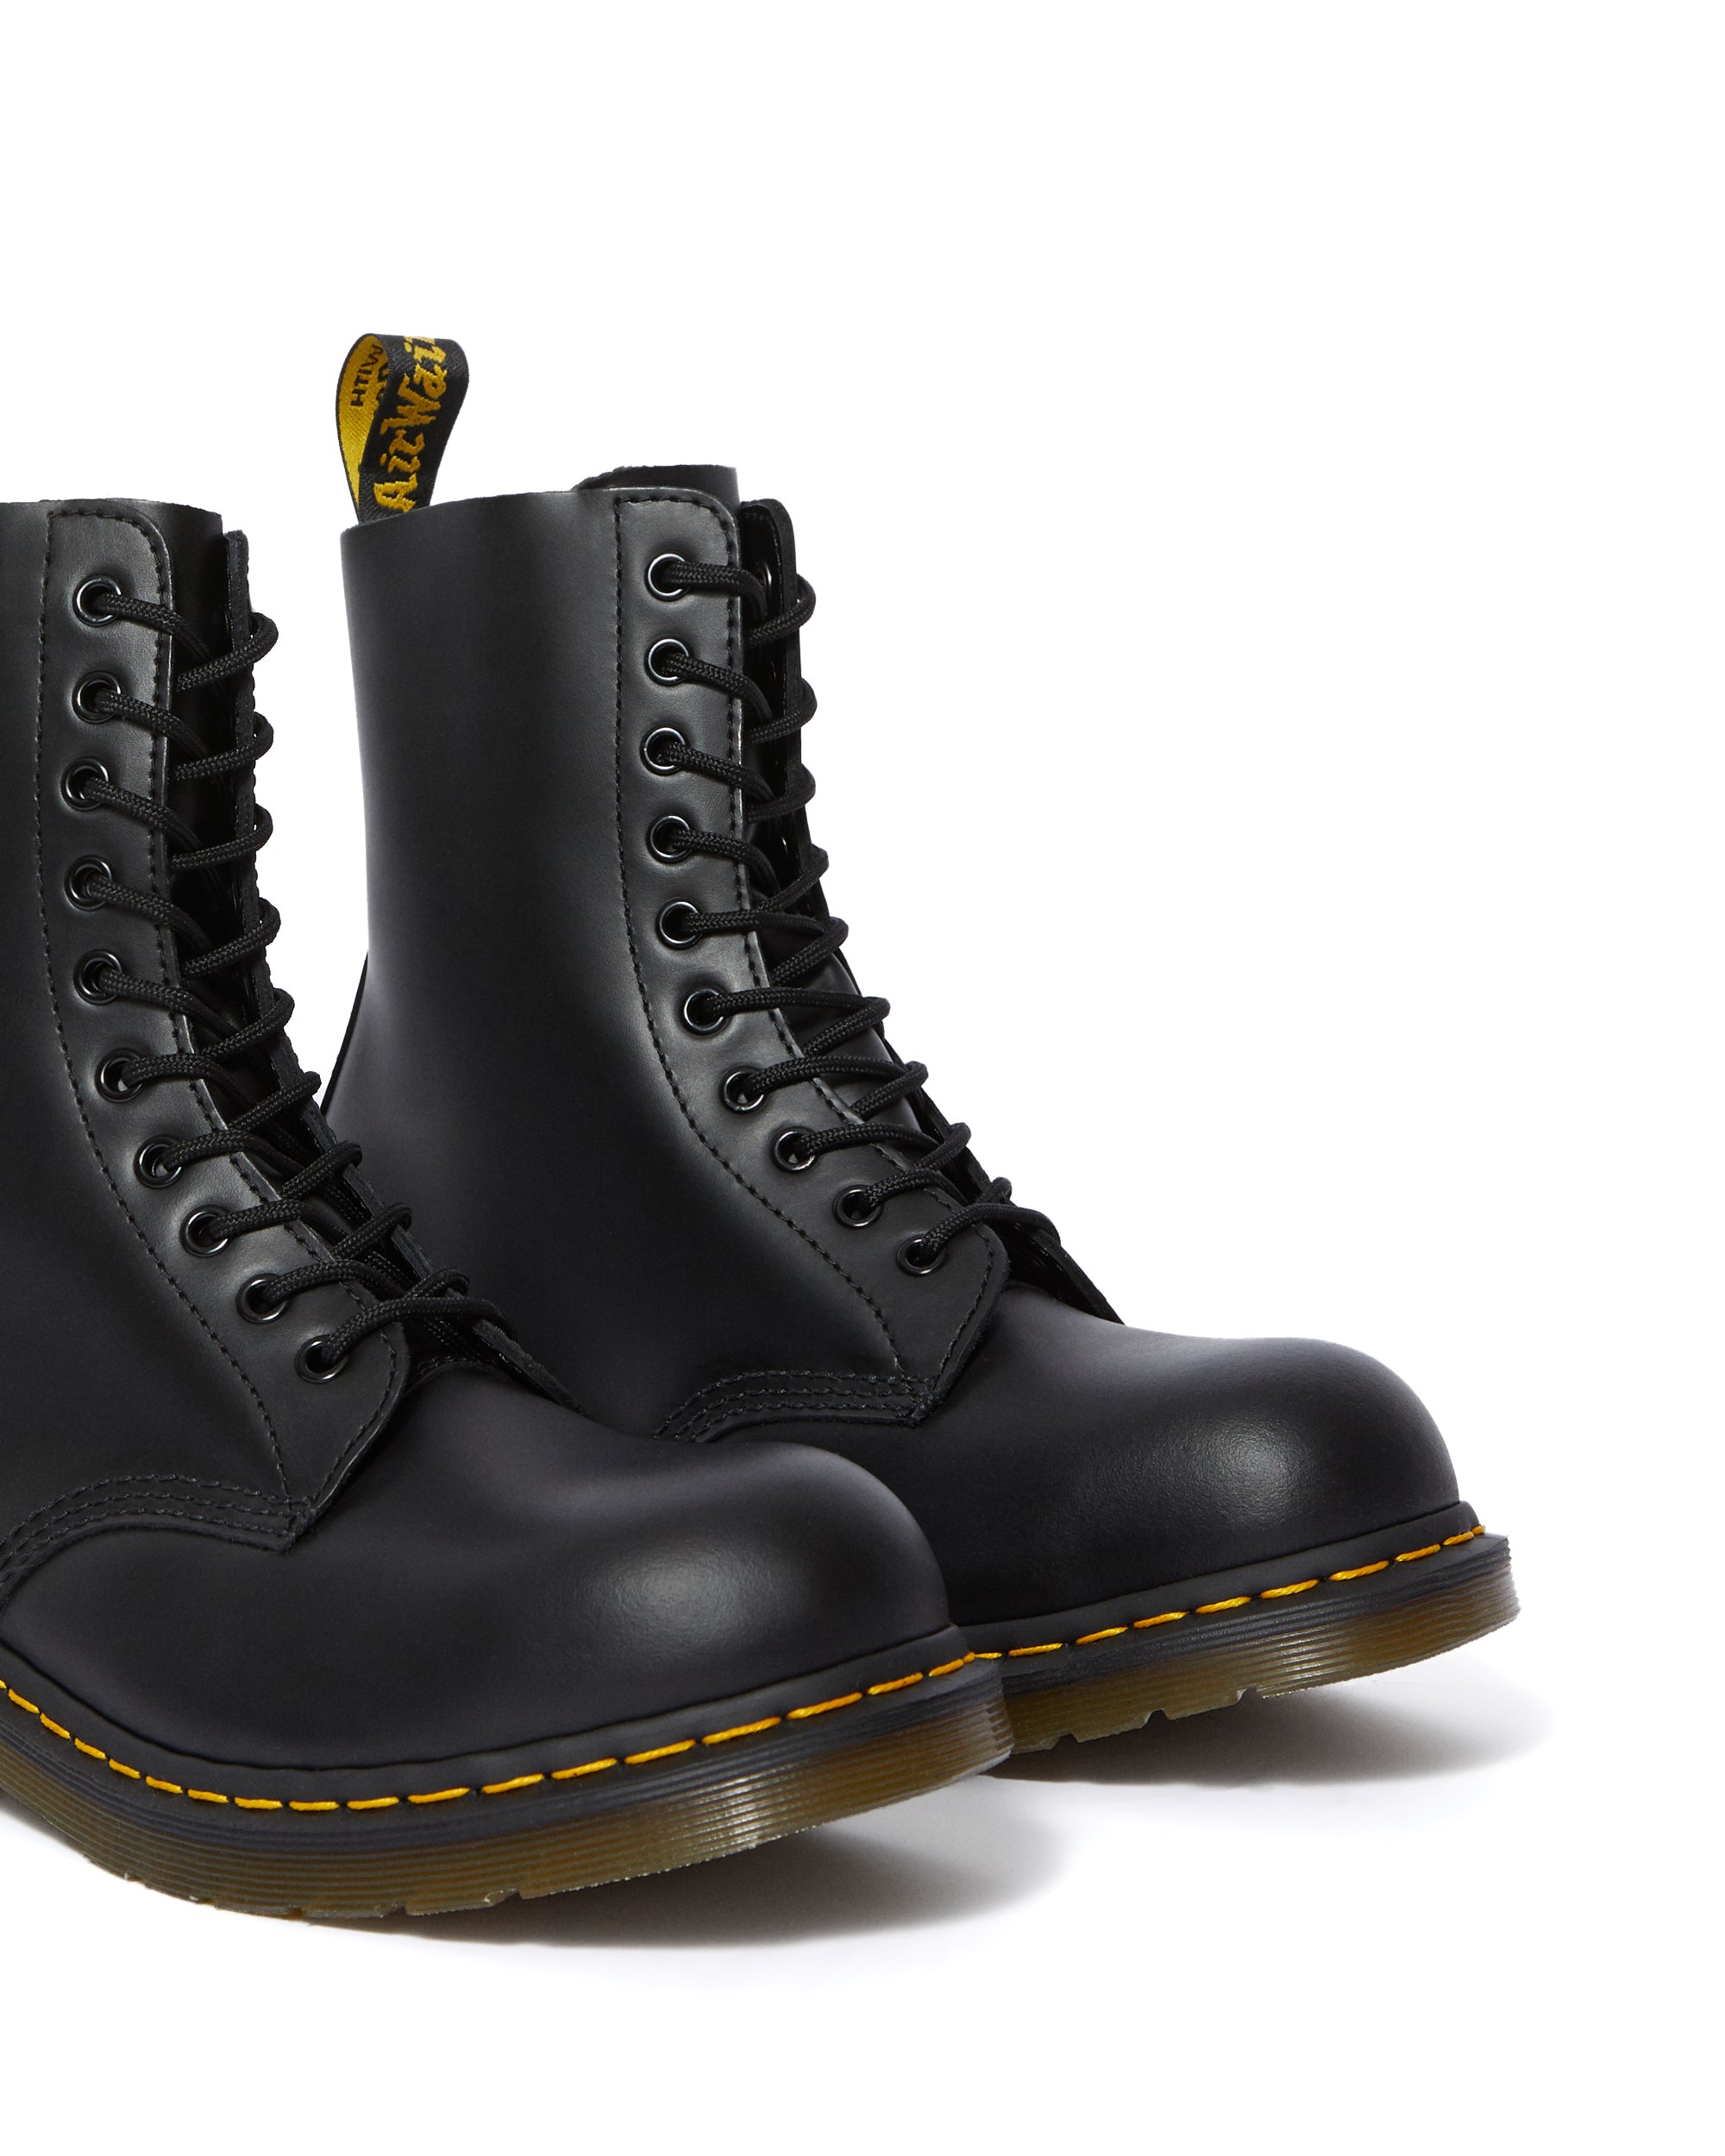 1919 BLACK FINE HAIRCELL STEEL TOE BOOT – Posers Hollywood